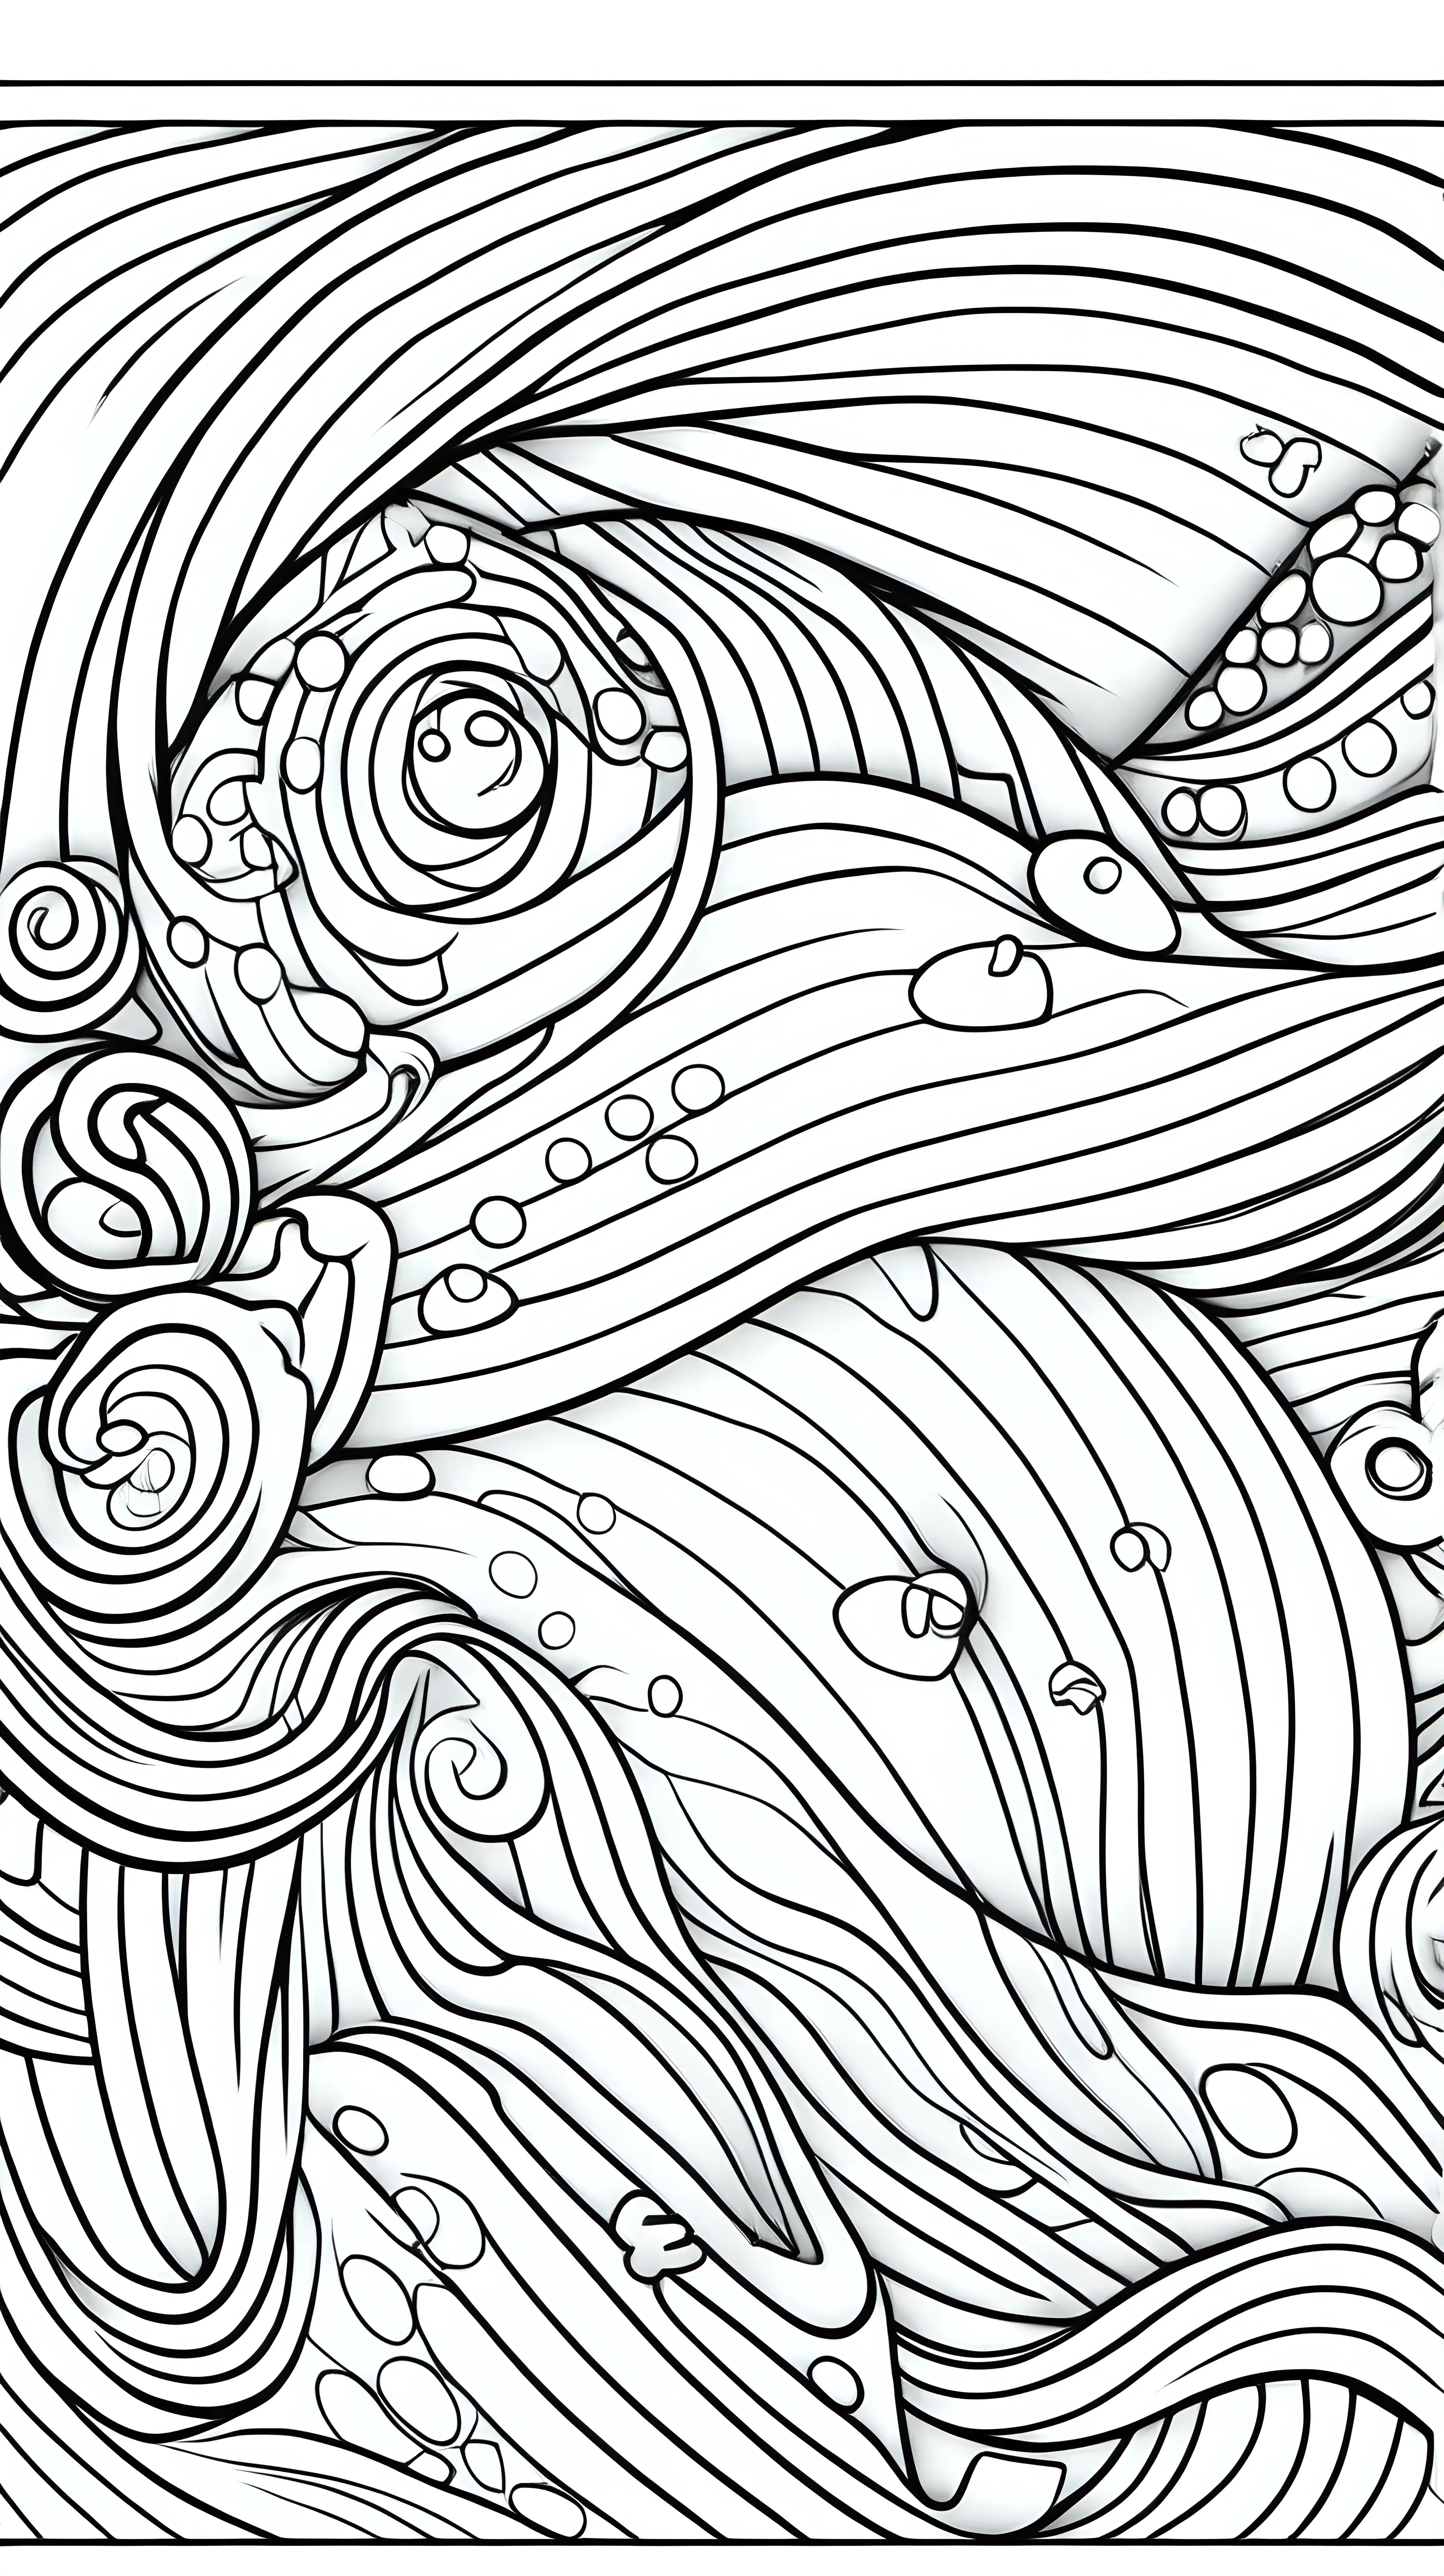 coloring page for kids vector lines, large basic patterns, style of a kids coloring book, thick, clear lines, low detail, no shading